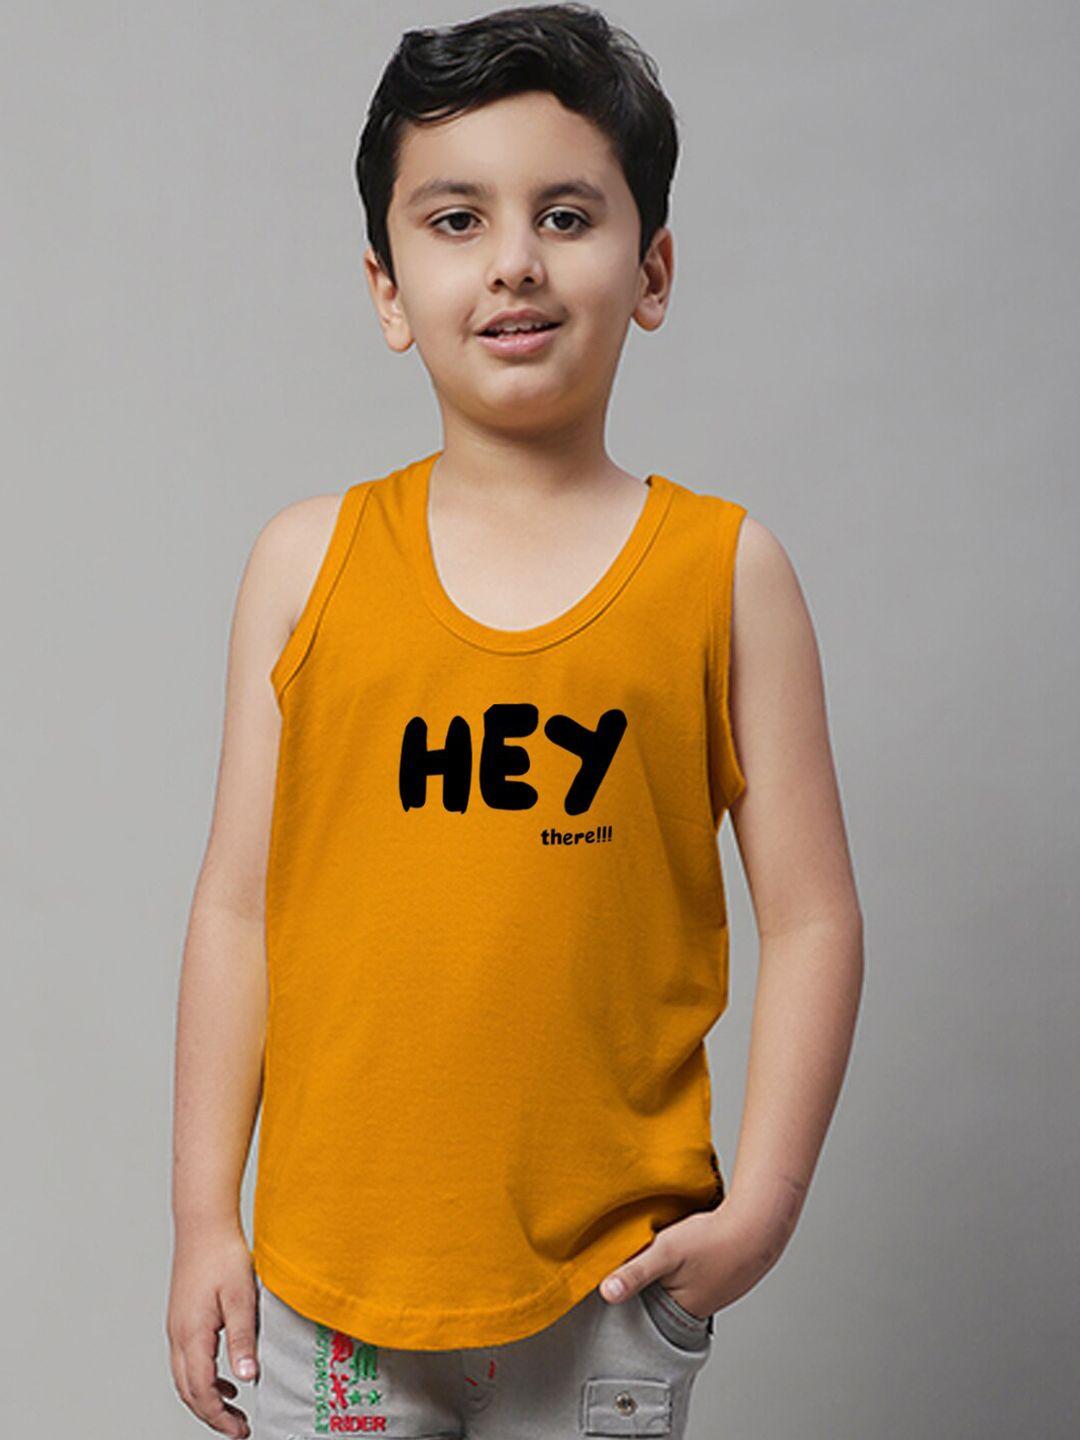 friskers boys bio wash hey there printed pure cotton innerwear vest